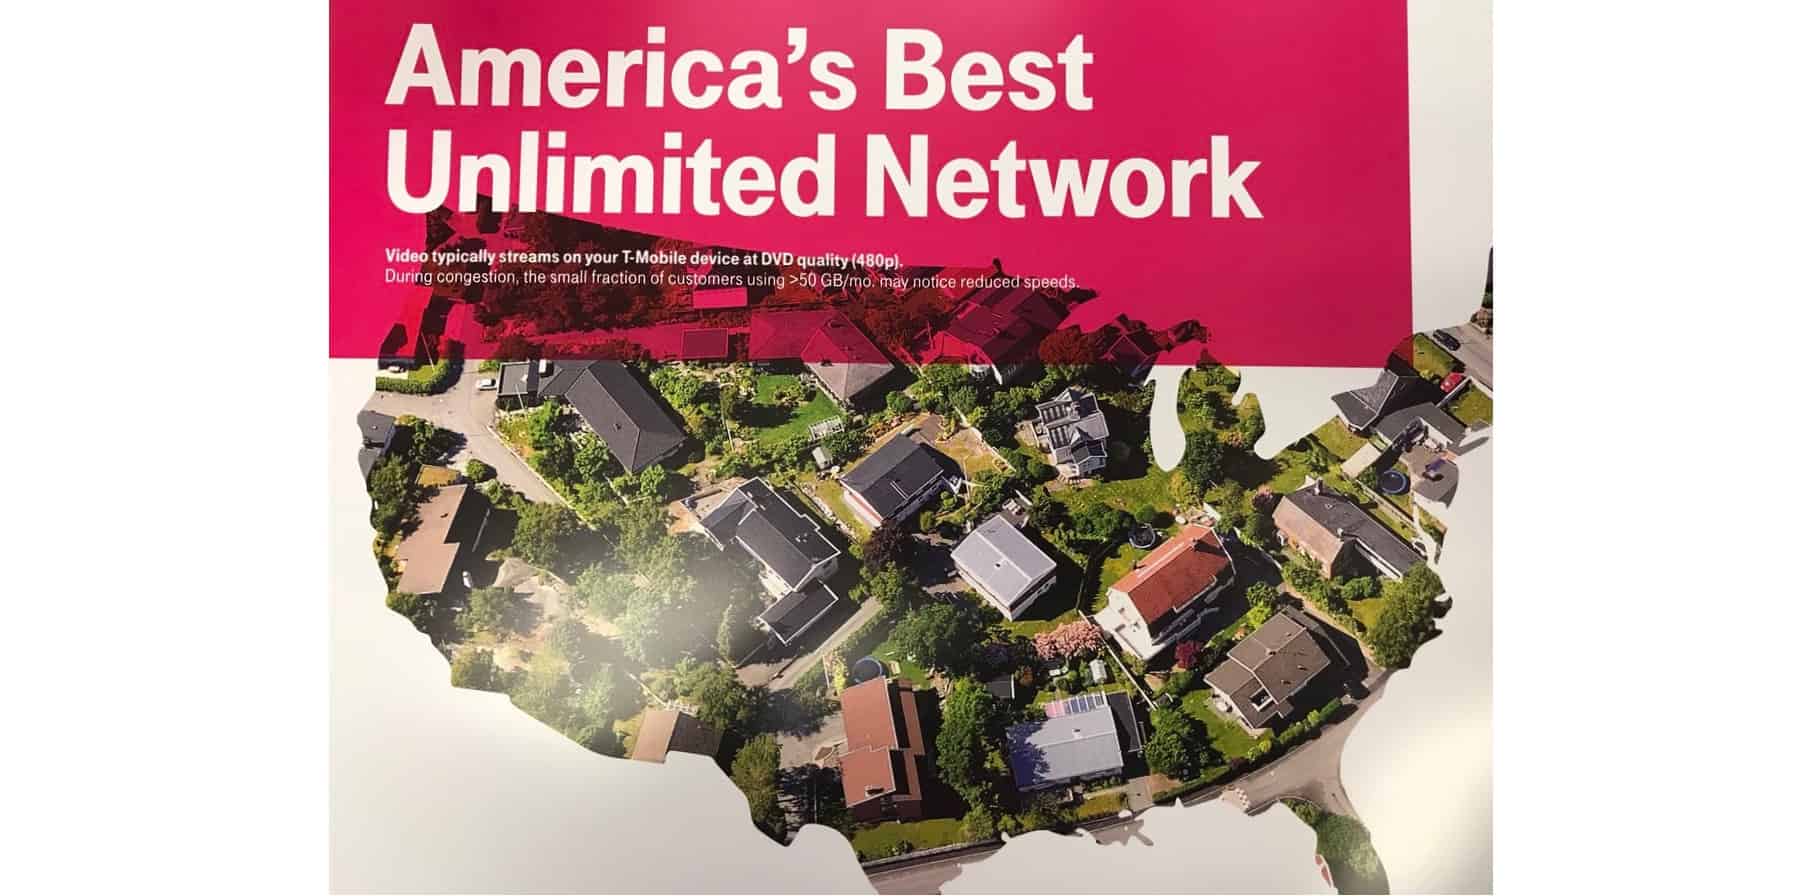 T-Mobile isn't America's Best Unlimited Network.